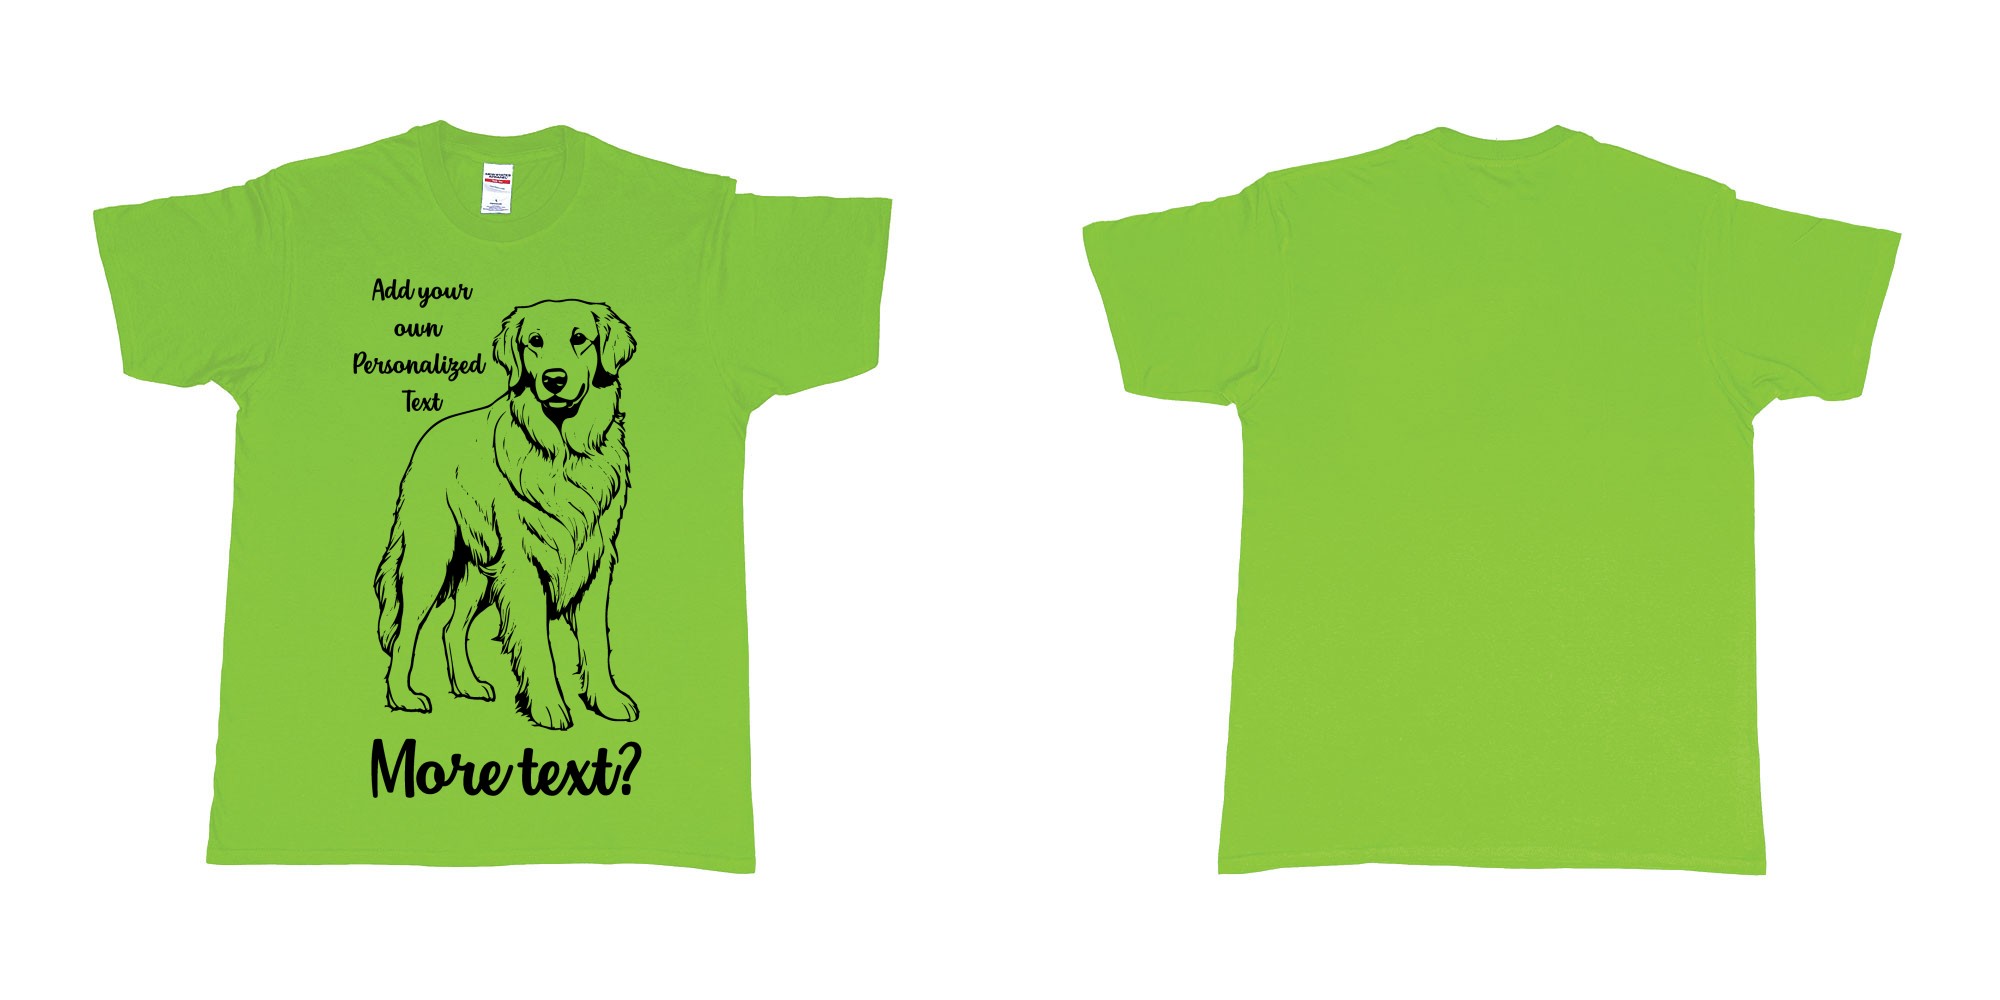 Custom tshirt design golden retriever dog breed personalized text in fabric color lime choice your own text made in Bali by The Pirate Way